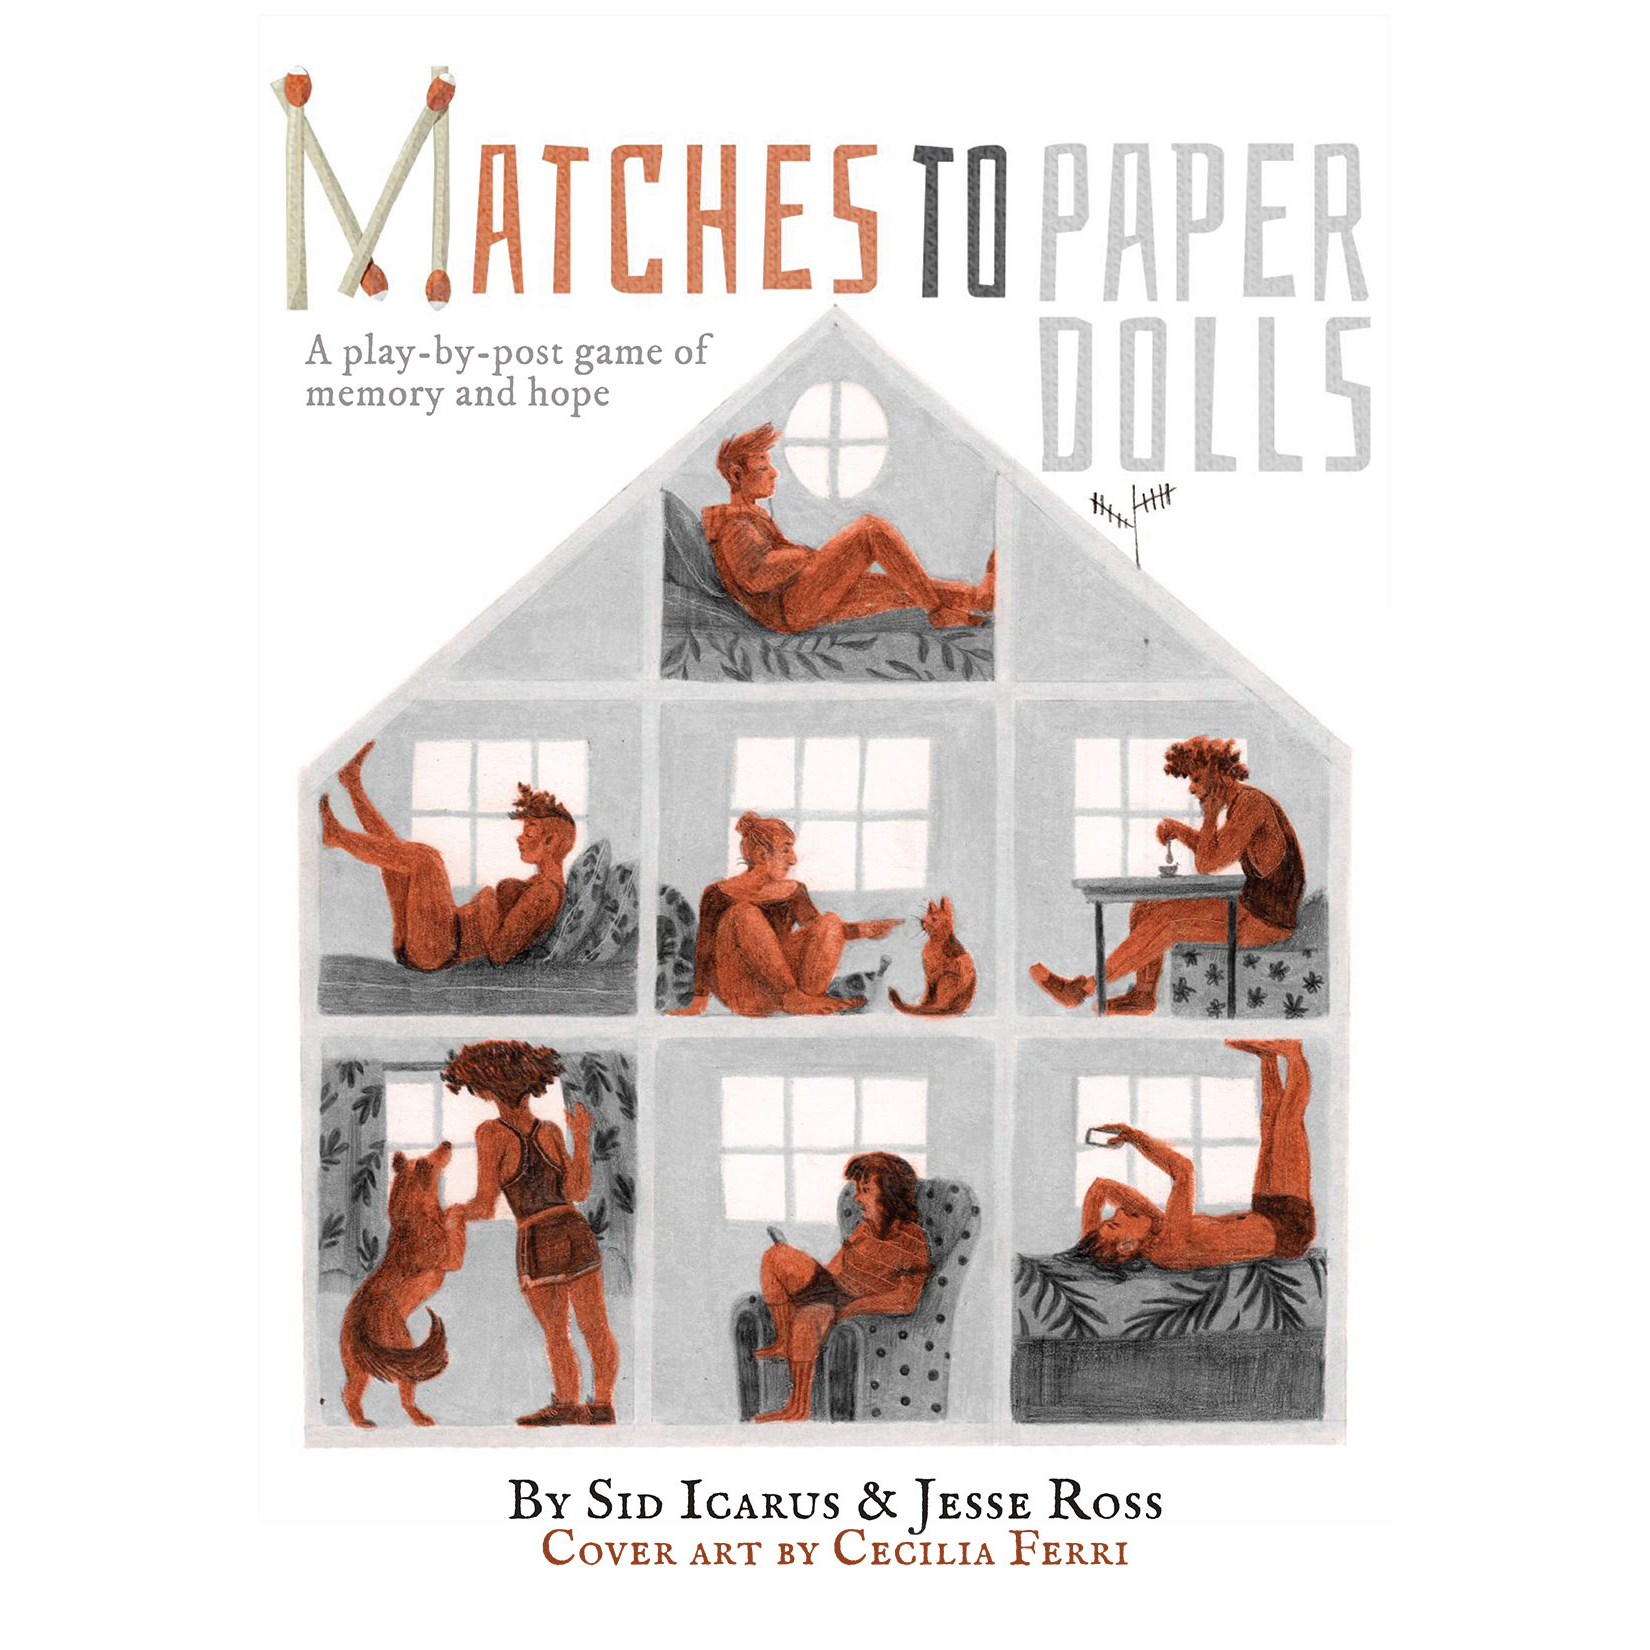 Matches to Paper Dolls